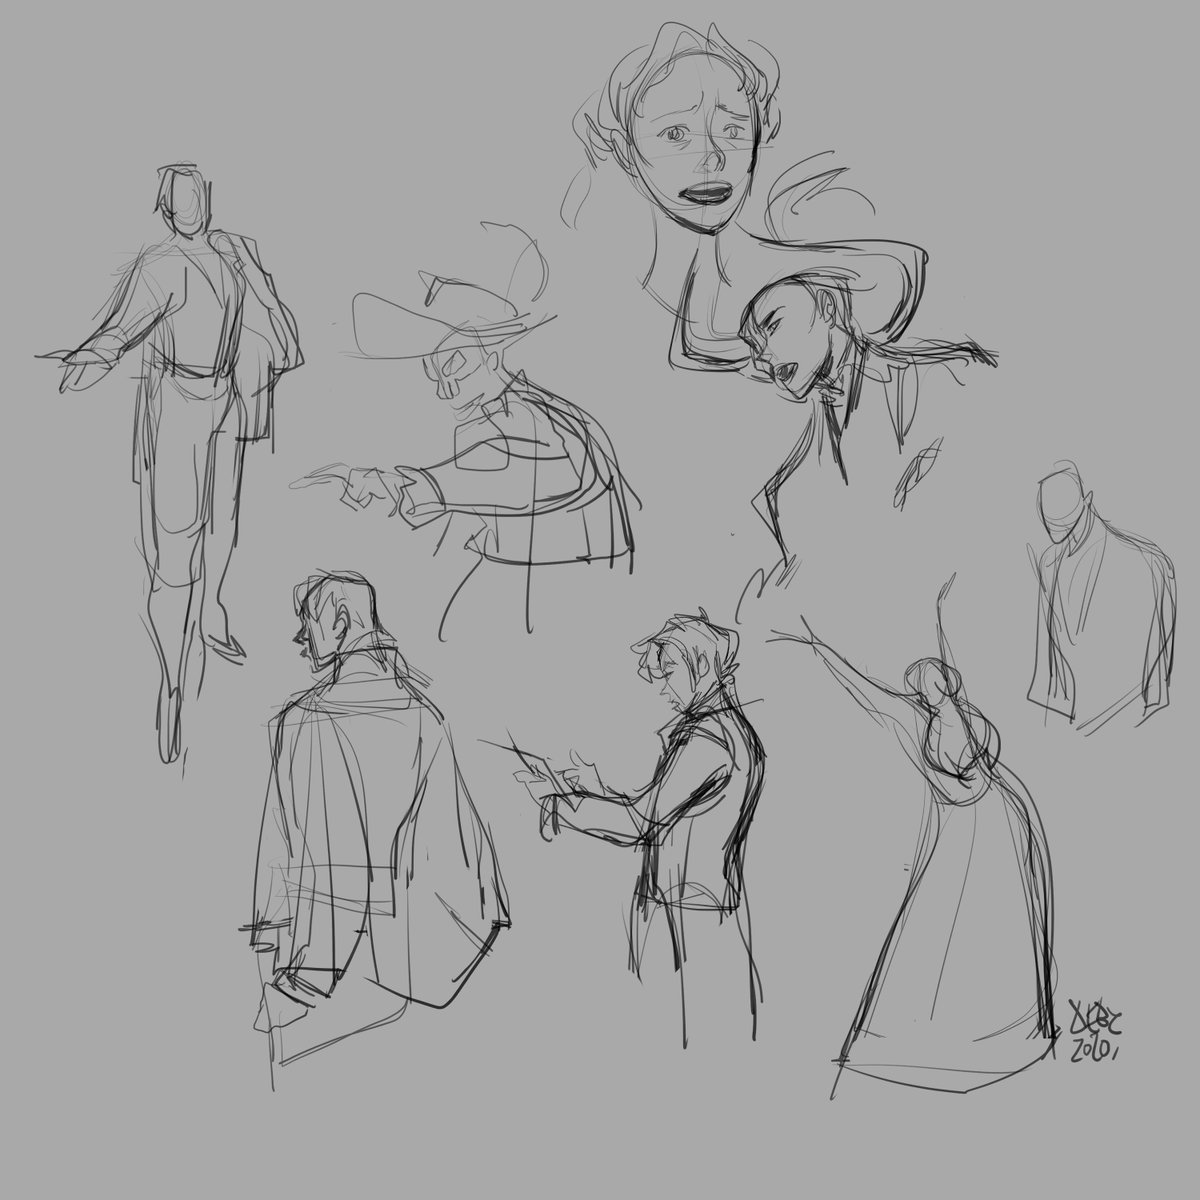 Some Phantom of the Opera gesture practice!! 

In case anyone doesn't know, the full 25th anniversary of Phantom of the Opera is online for the next (as of this post) 35 hours in support of The Actors Fund:  Covid-19 Emergency Relief. ✨

https://t.co/4npCKfC5U3 